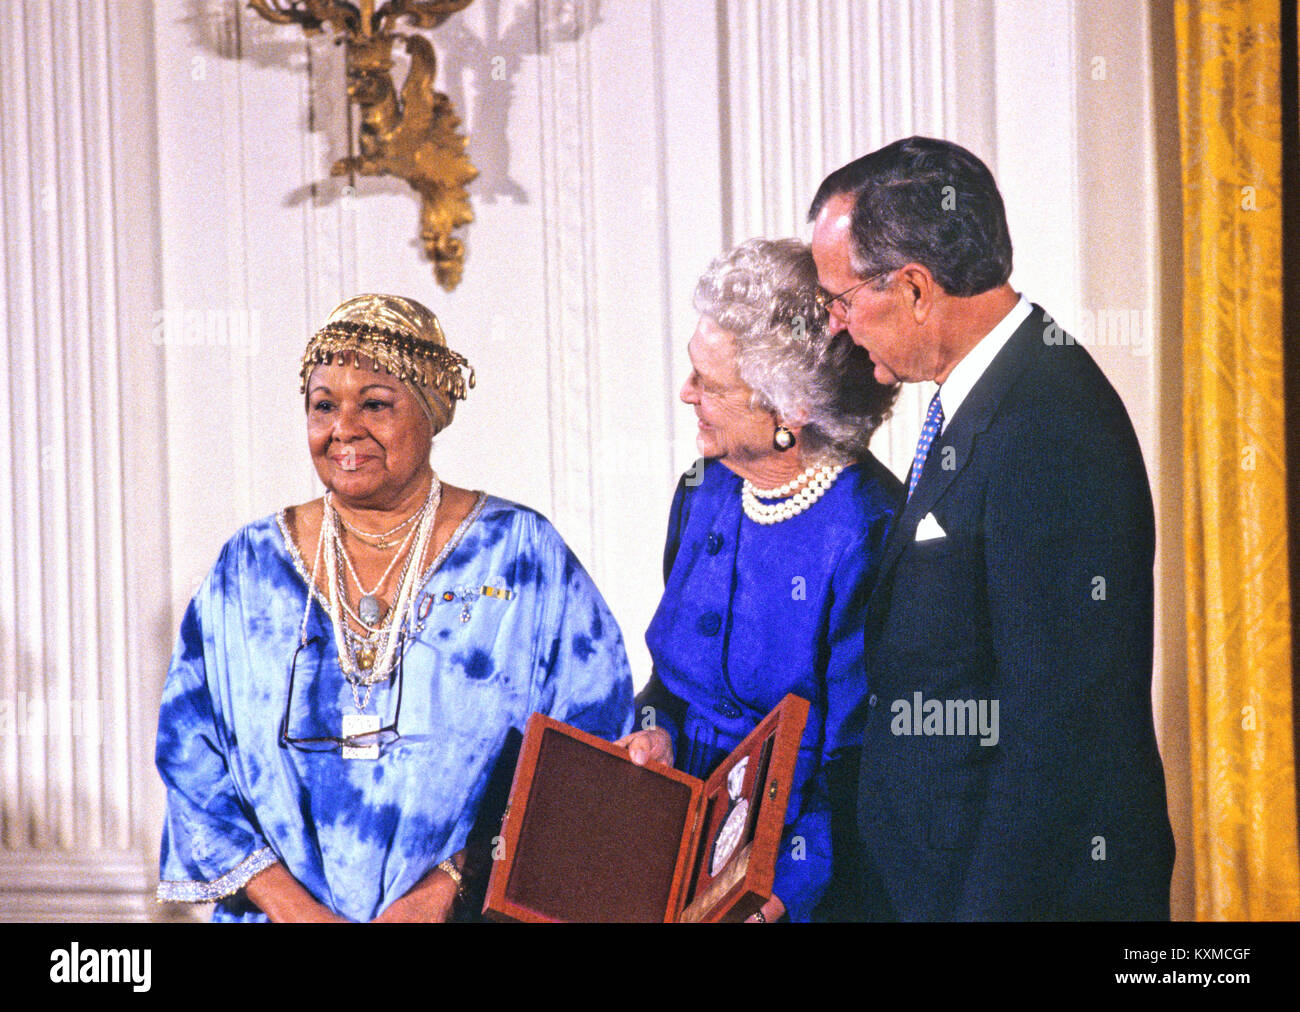 United States President George H.W. Bush and first lady Barbara Bush present the National Medal of Arts to American dancer and choreographer Katherine Dunham during a ceremony in the East Room of the White House in Washington, DC on November 19, 1989.  Credit: Ron Sachs / CNP /MediaPunch Stock Photo